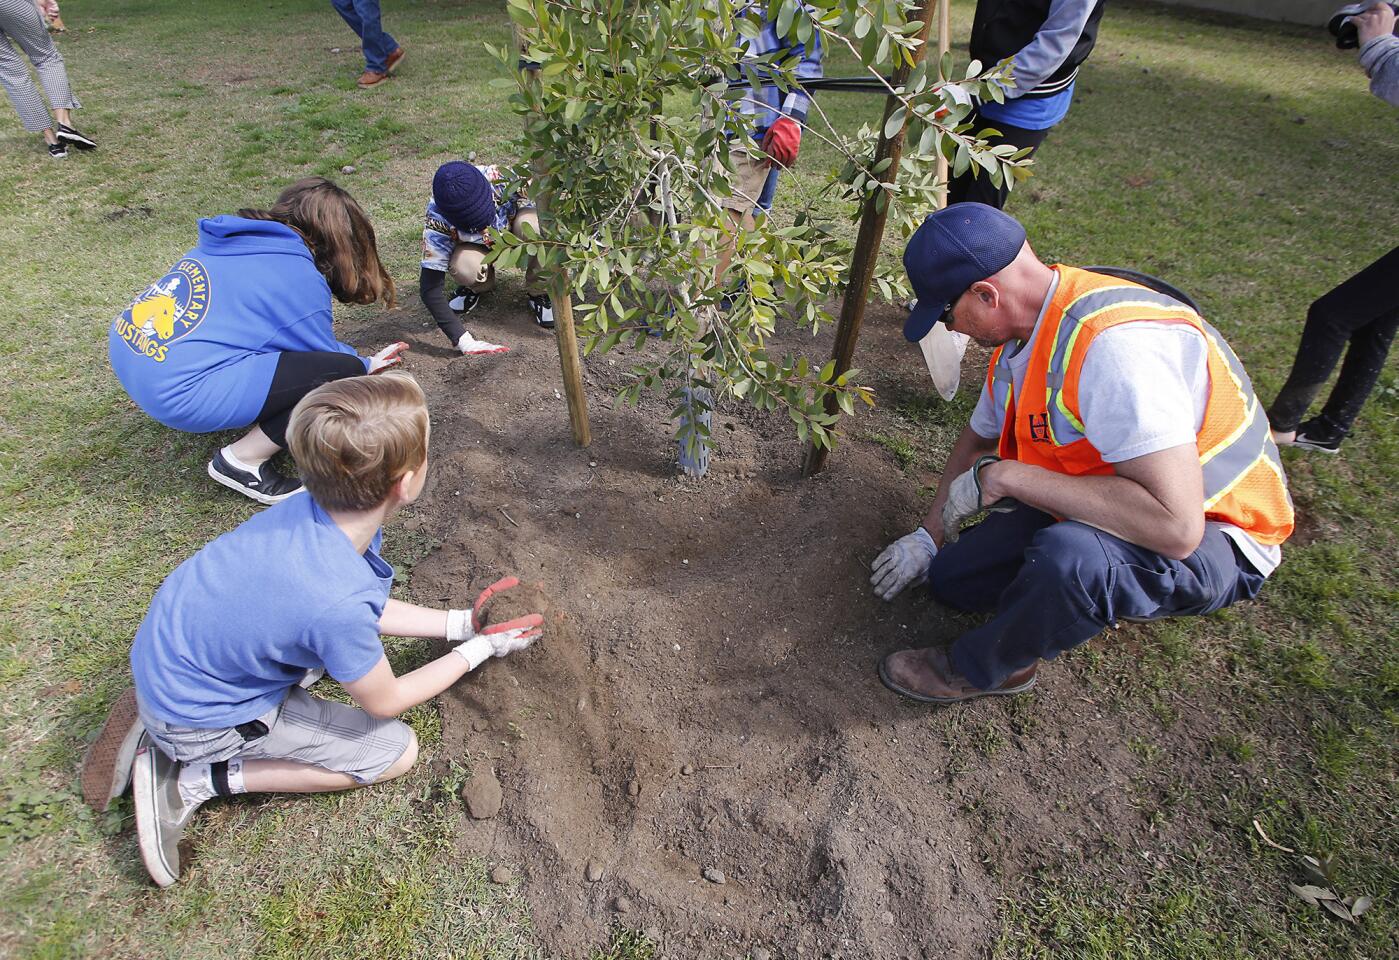 Mike Rehberger from the Huntington Beach Public Works Department helps students from S.A. Moffett Elementary School plant a melaleuca tree during an Arbor Day event at Drew Park on Wednesday.